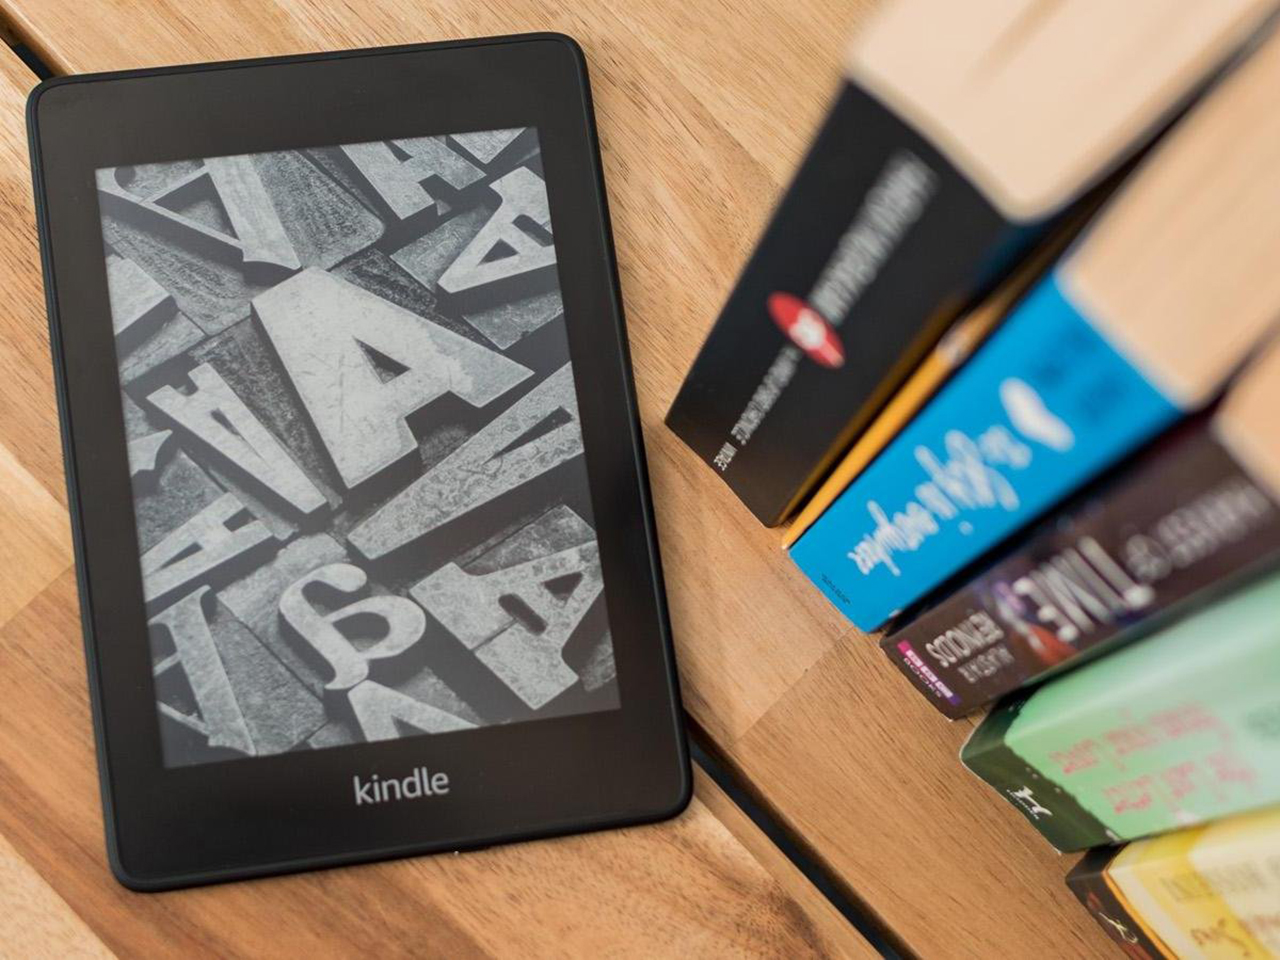 Amazon Kindle gets involved in an artificial intelligence scandal!